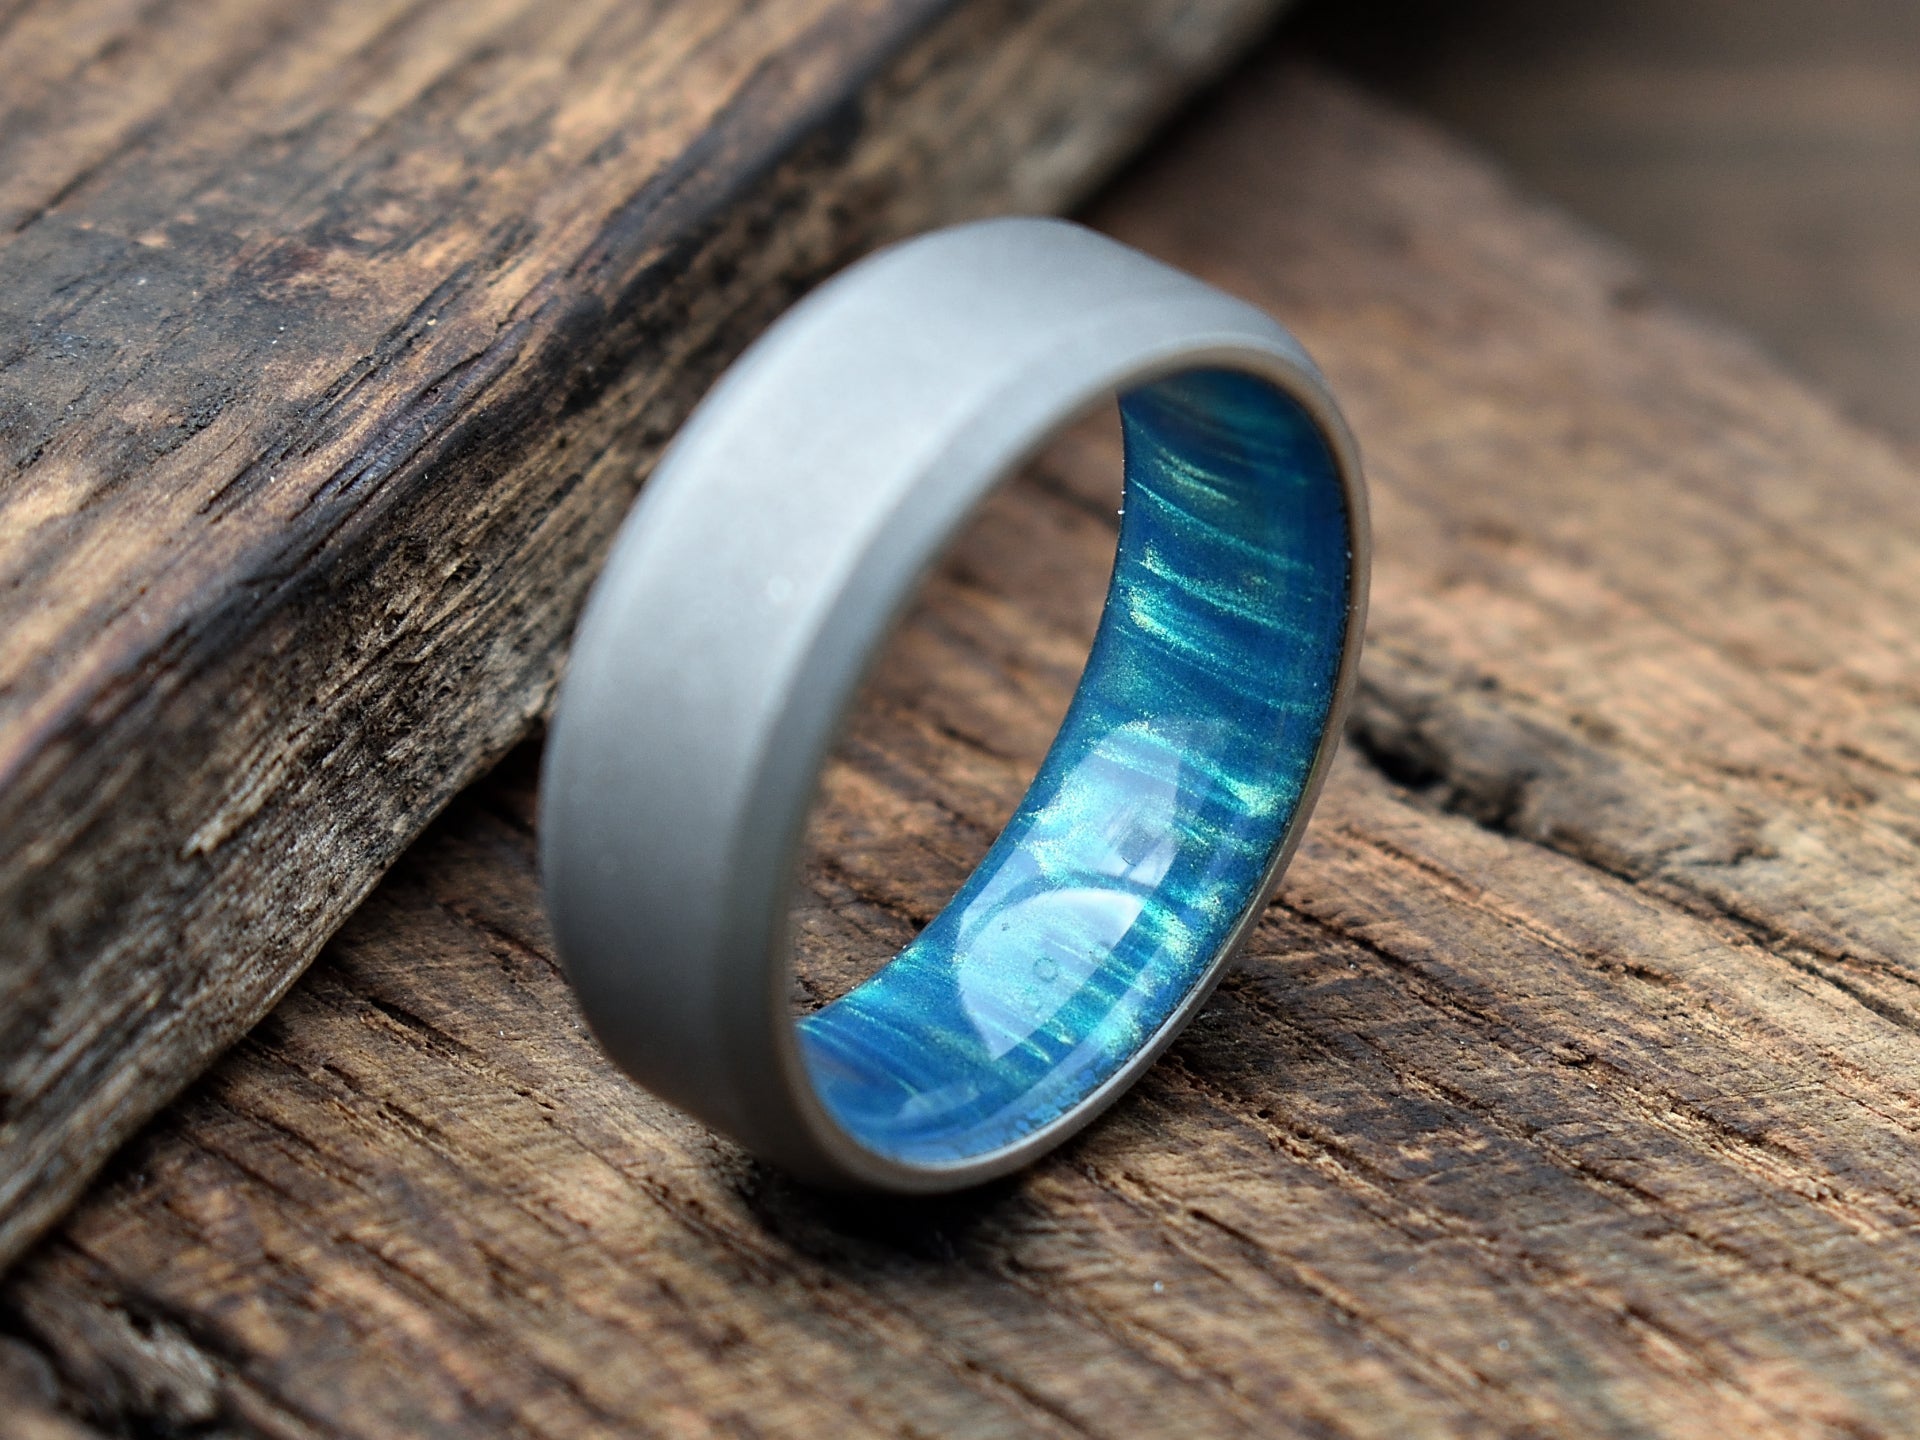 How to Make a Resin Ring - FeltMagnet